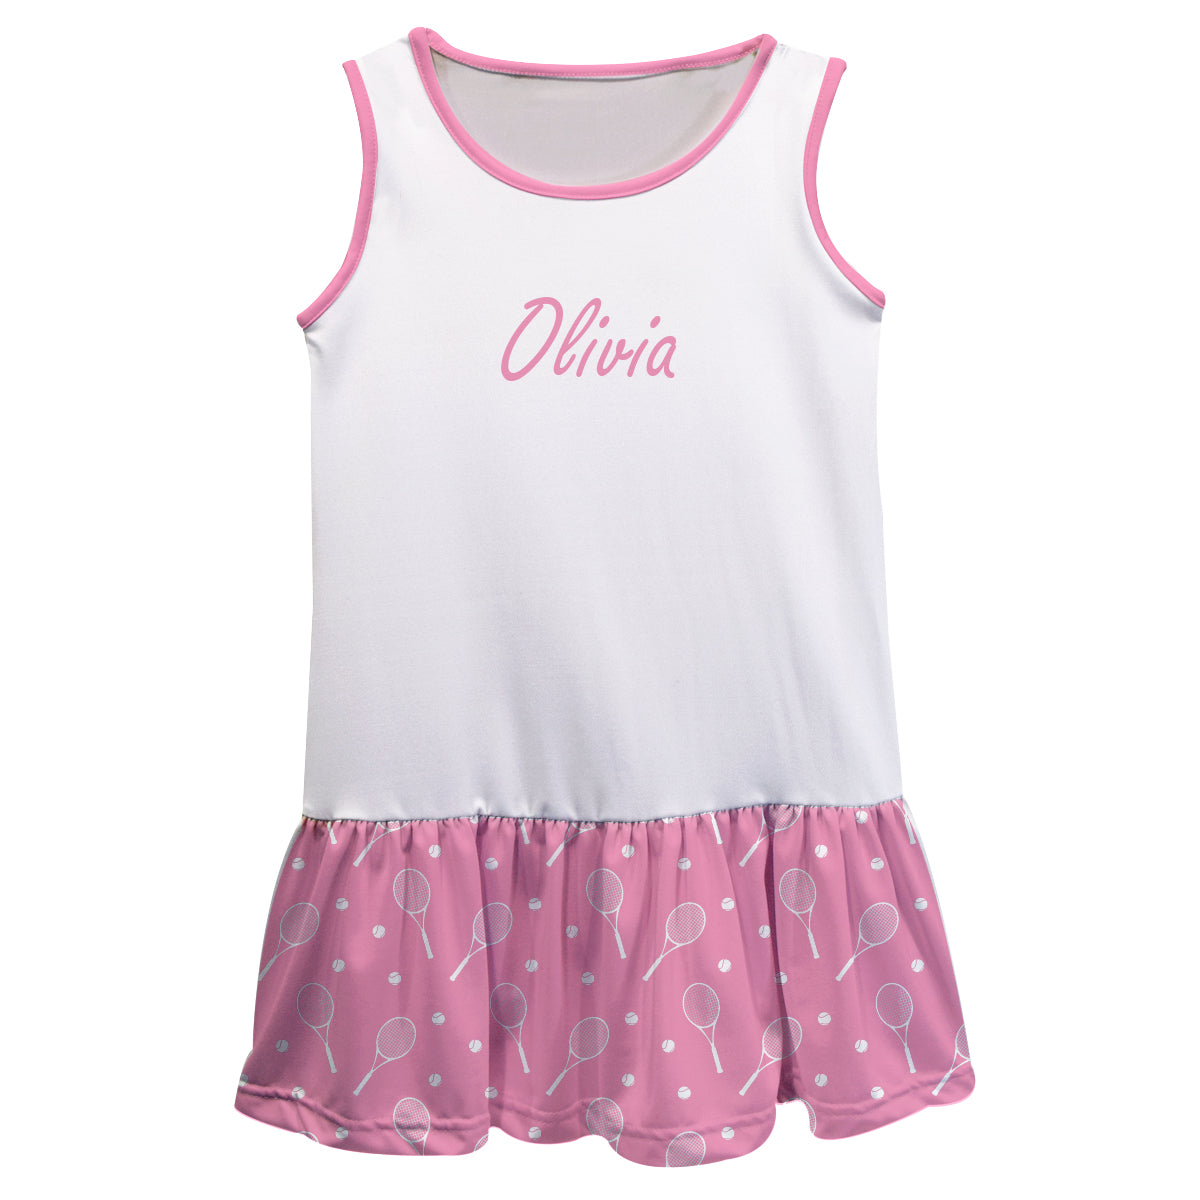 Tennis Rackets Personalized Name White and Pink Lily Dress